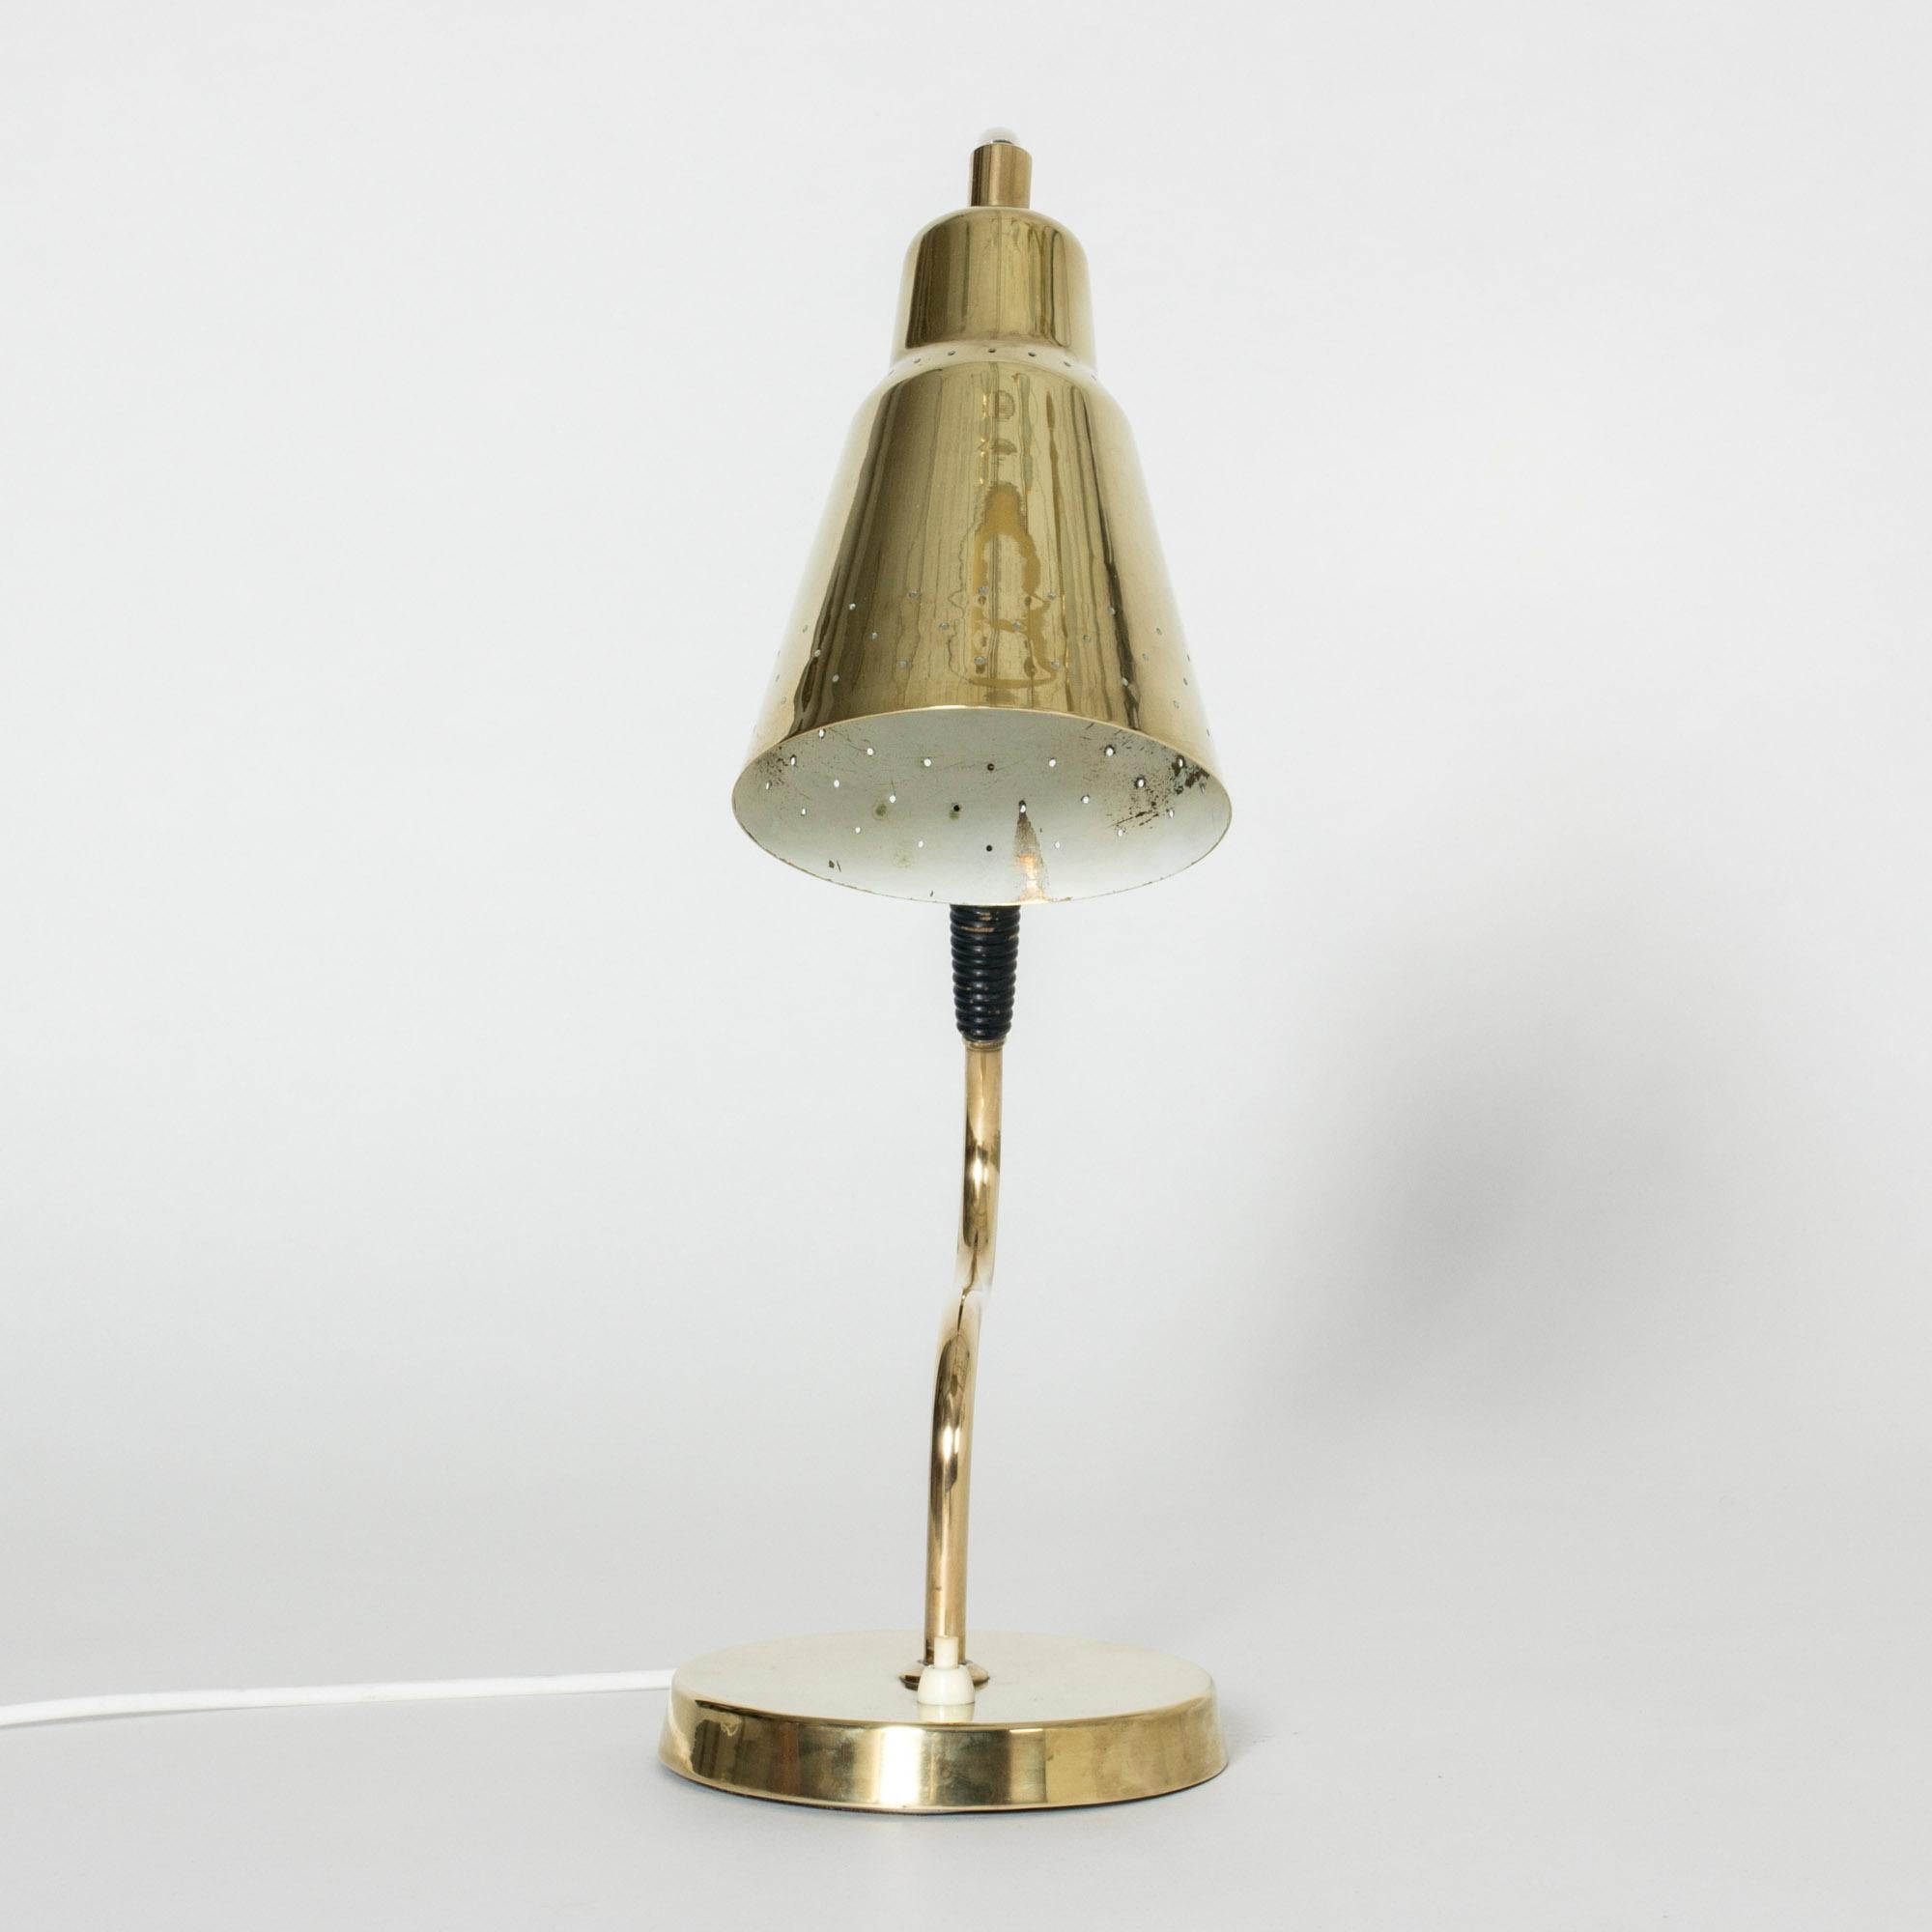 Elegant and buoyant brass table or desk lamp from Bergboms. Lampshade perforated with a pattern of small holes.